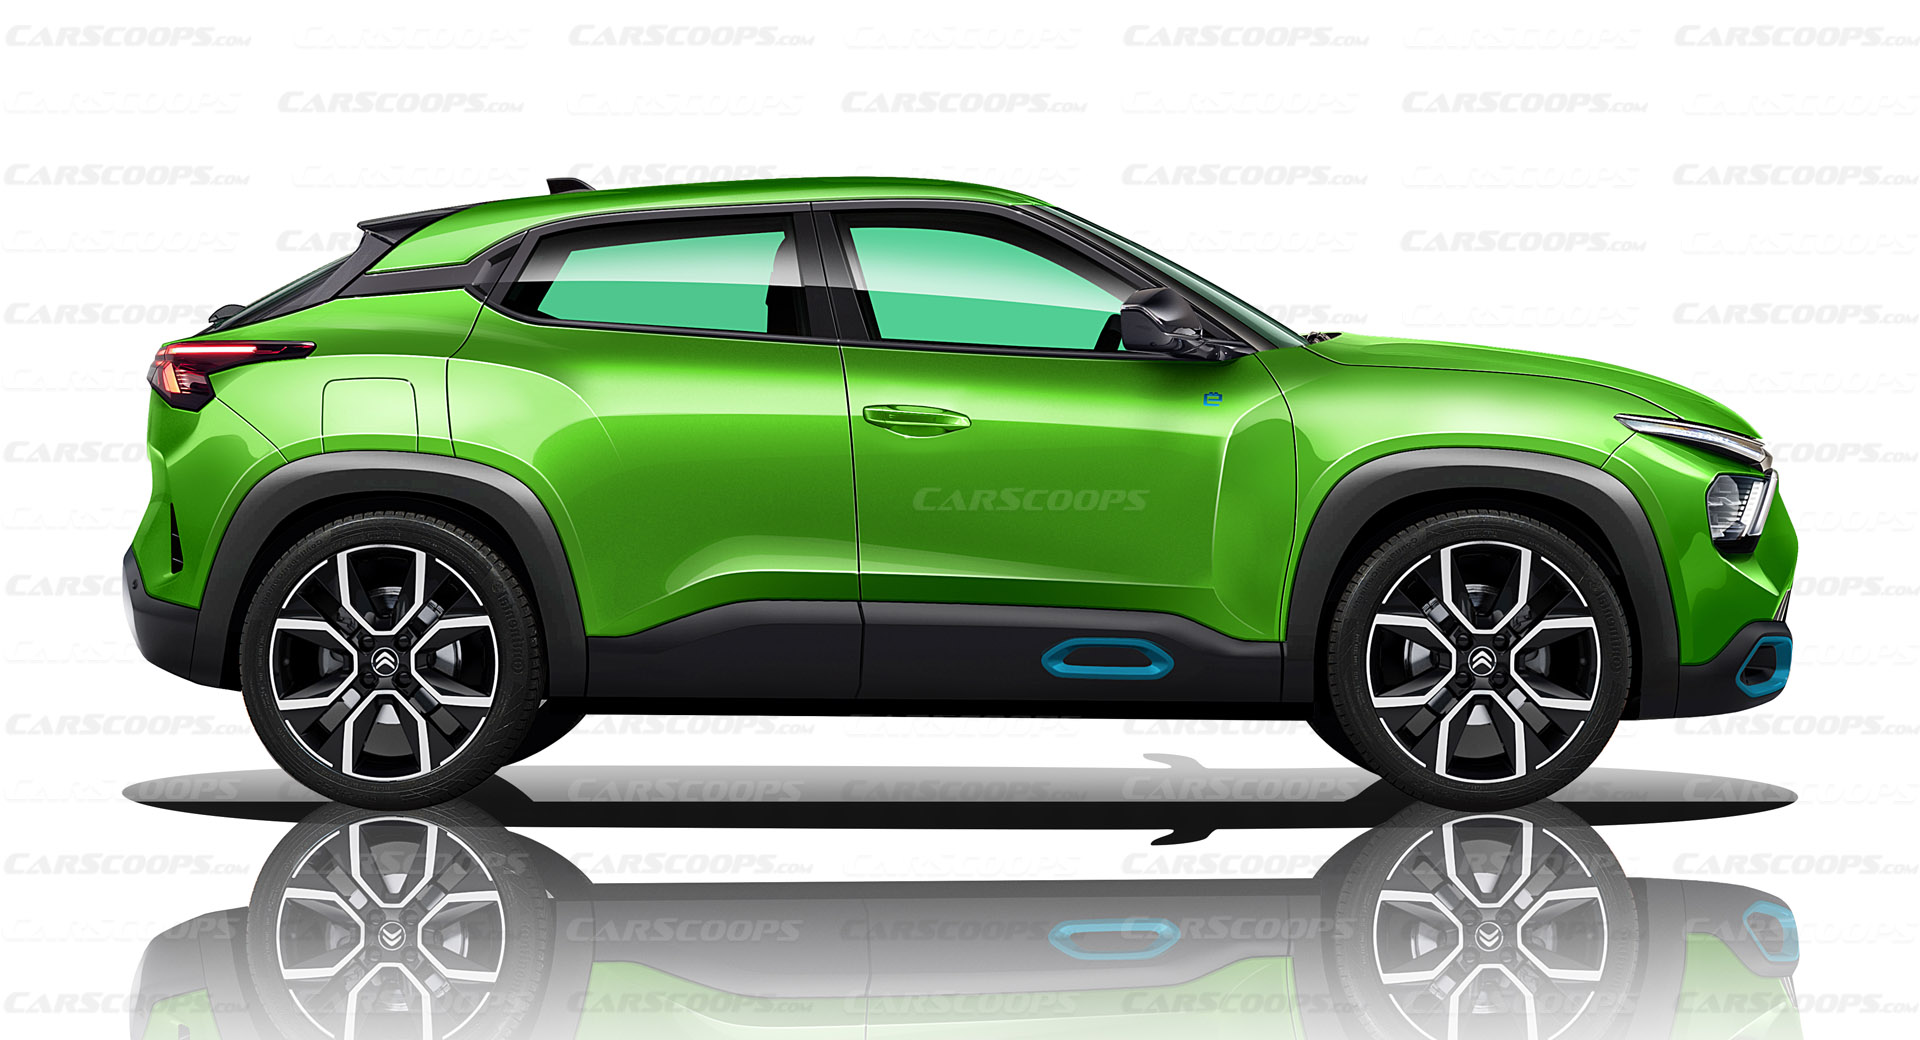 2023 Citroën C4 Aircross Would Make A Fine Addition To The Brand's